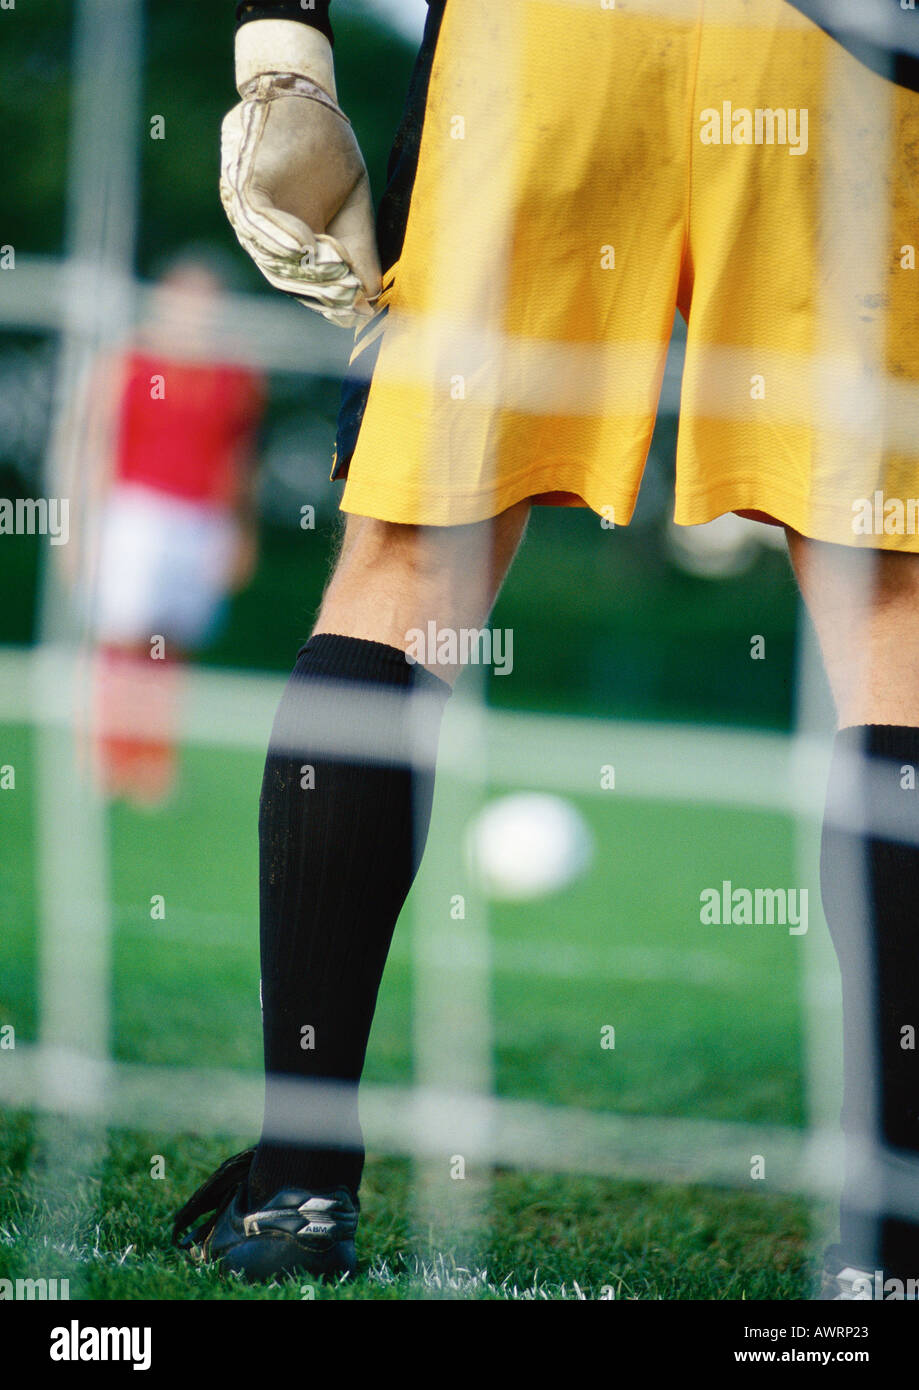 Goal keeper defending goal area when opponent is about to take penalty kick, seen from behind the goal. Stock Photo